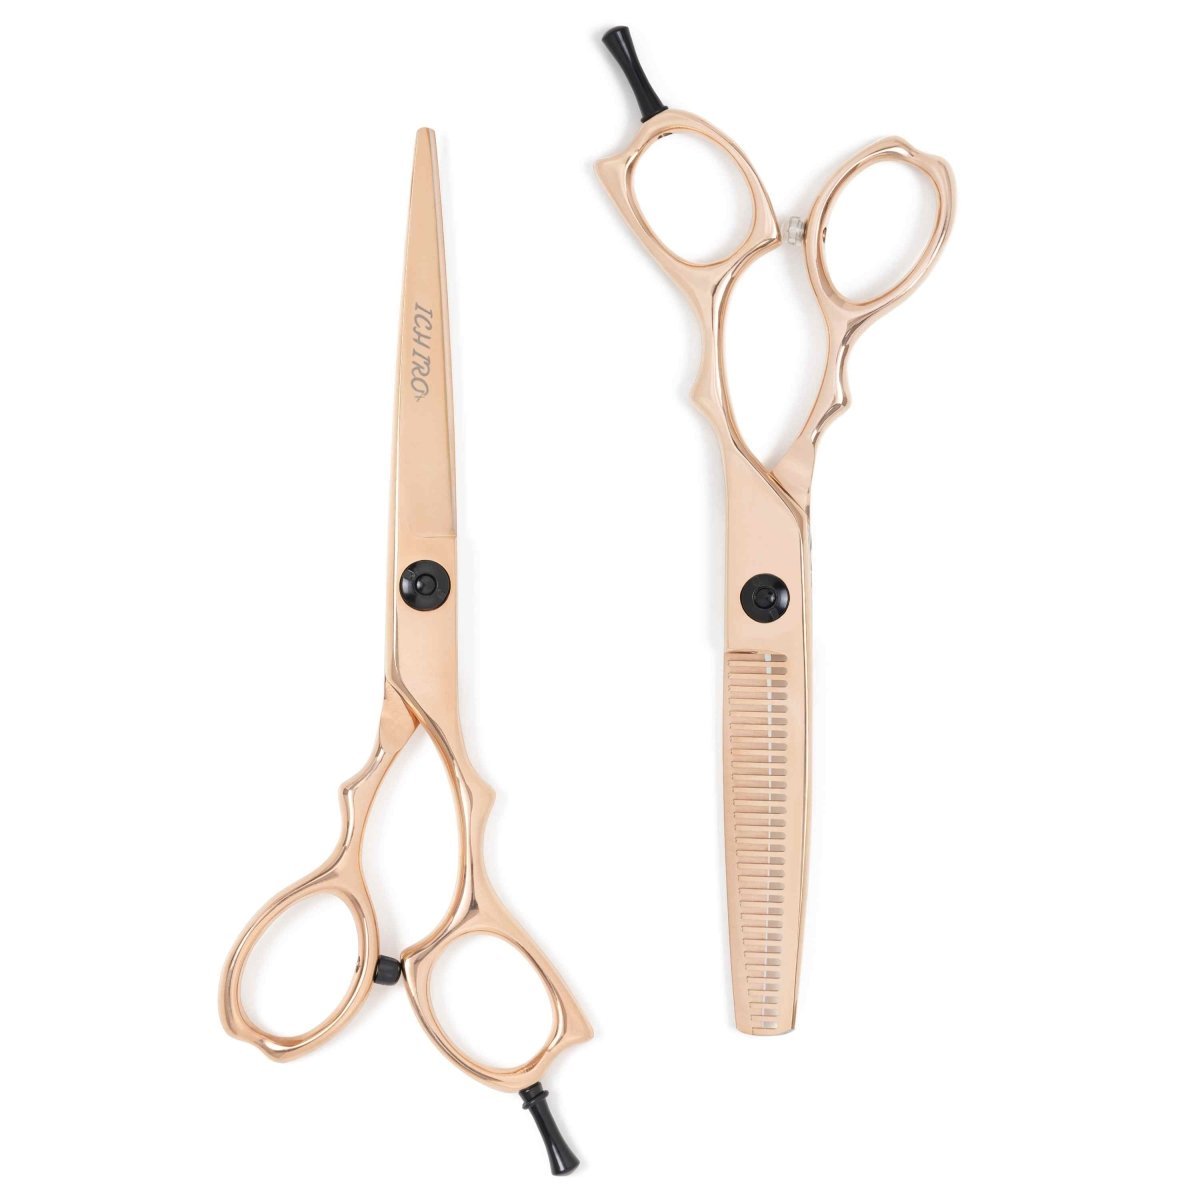 Hairdresser Scissors The Rose Gold Aichei Mountain Twin Set, Deluxe Professional Hair Shears